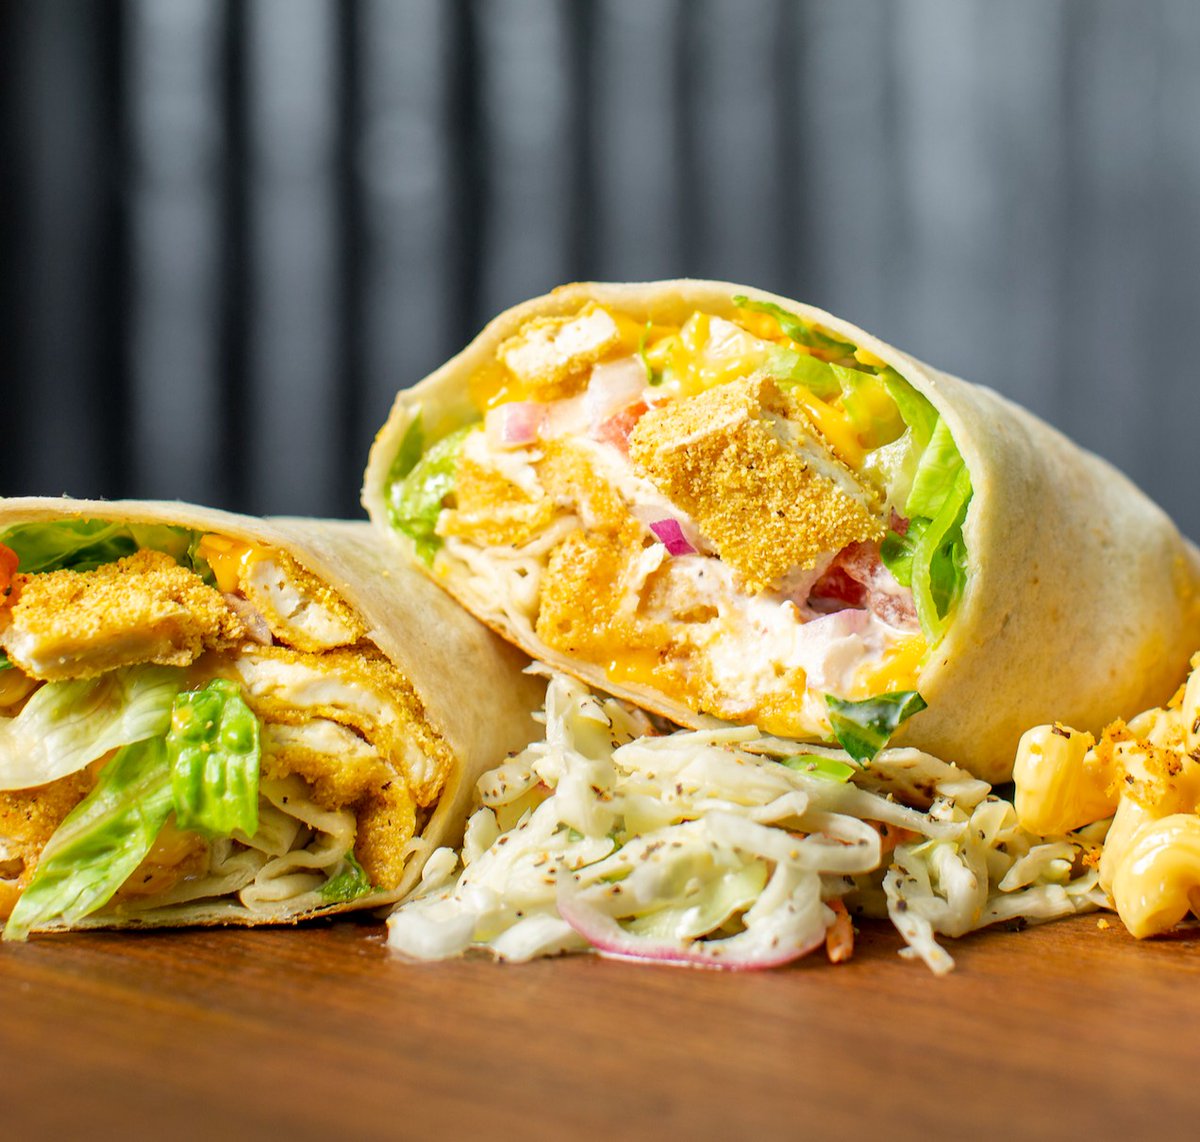 Did you know you can choose your favorite protein for our Hot Honey Wrap? Choose from: * Chicken * Catfish * Tofu Come on in and taste for yourself! 😋 #stlsouthern #hothoneywrap #wrap #sandwich #chicken #catfish #tofu #nashvillehotchicken #stleats #eatlocal #explorestlouis